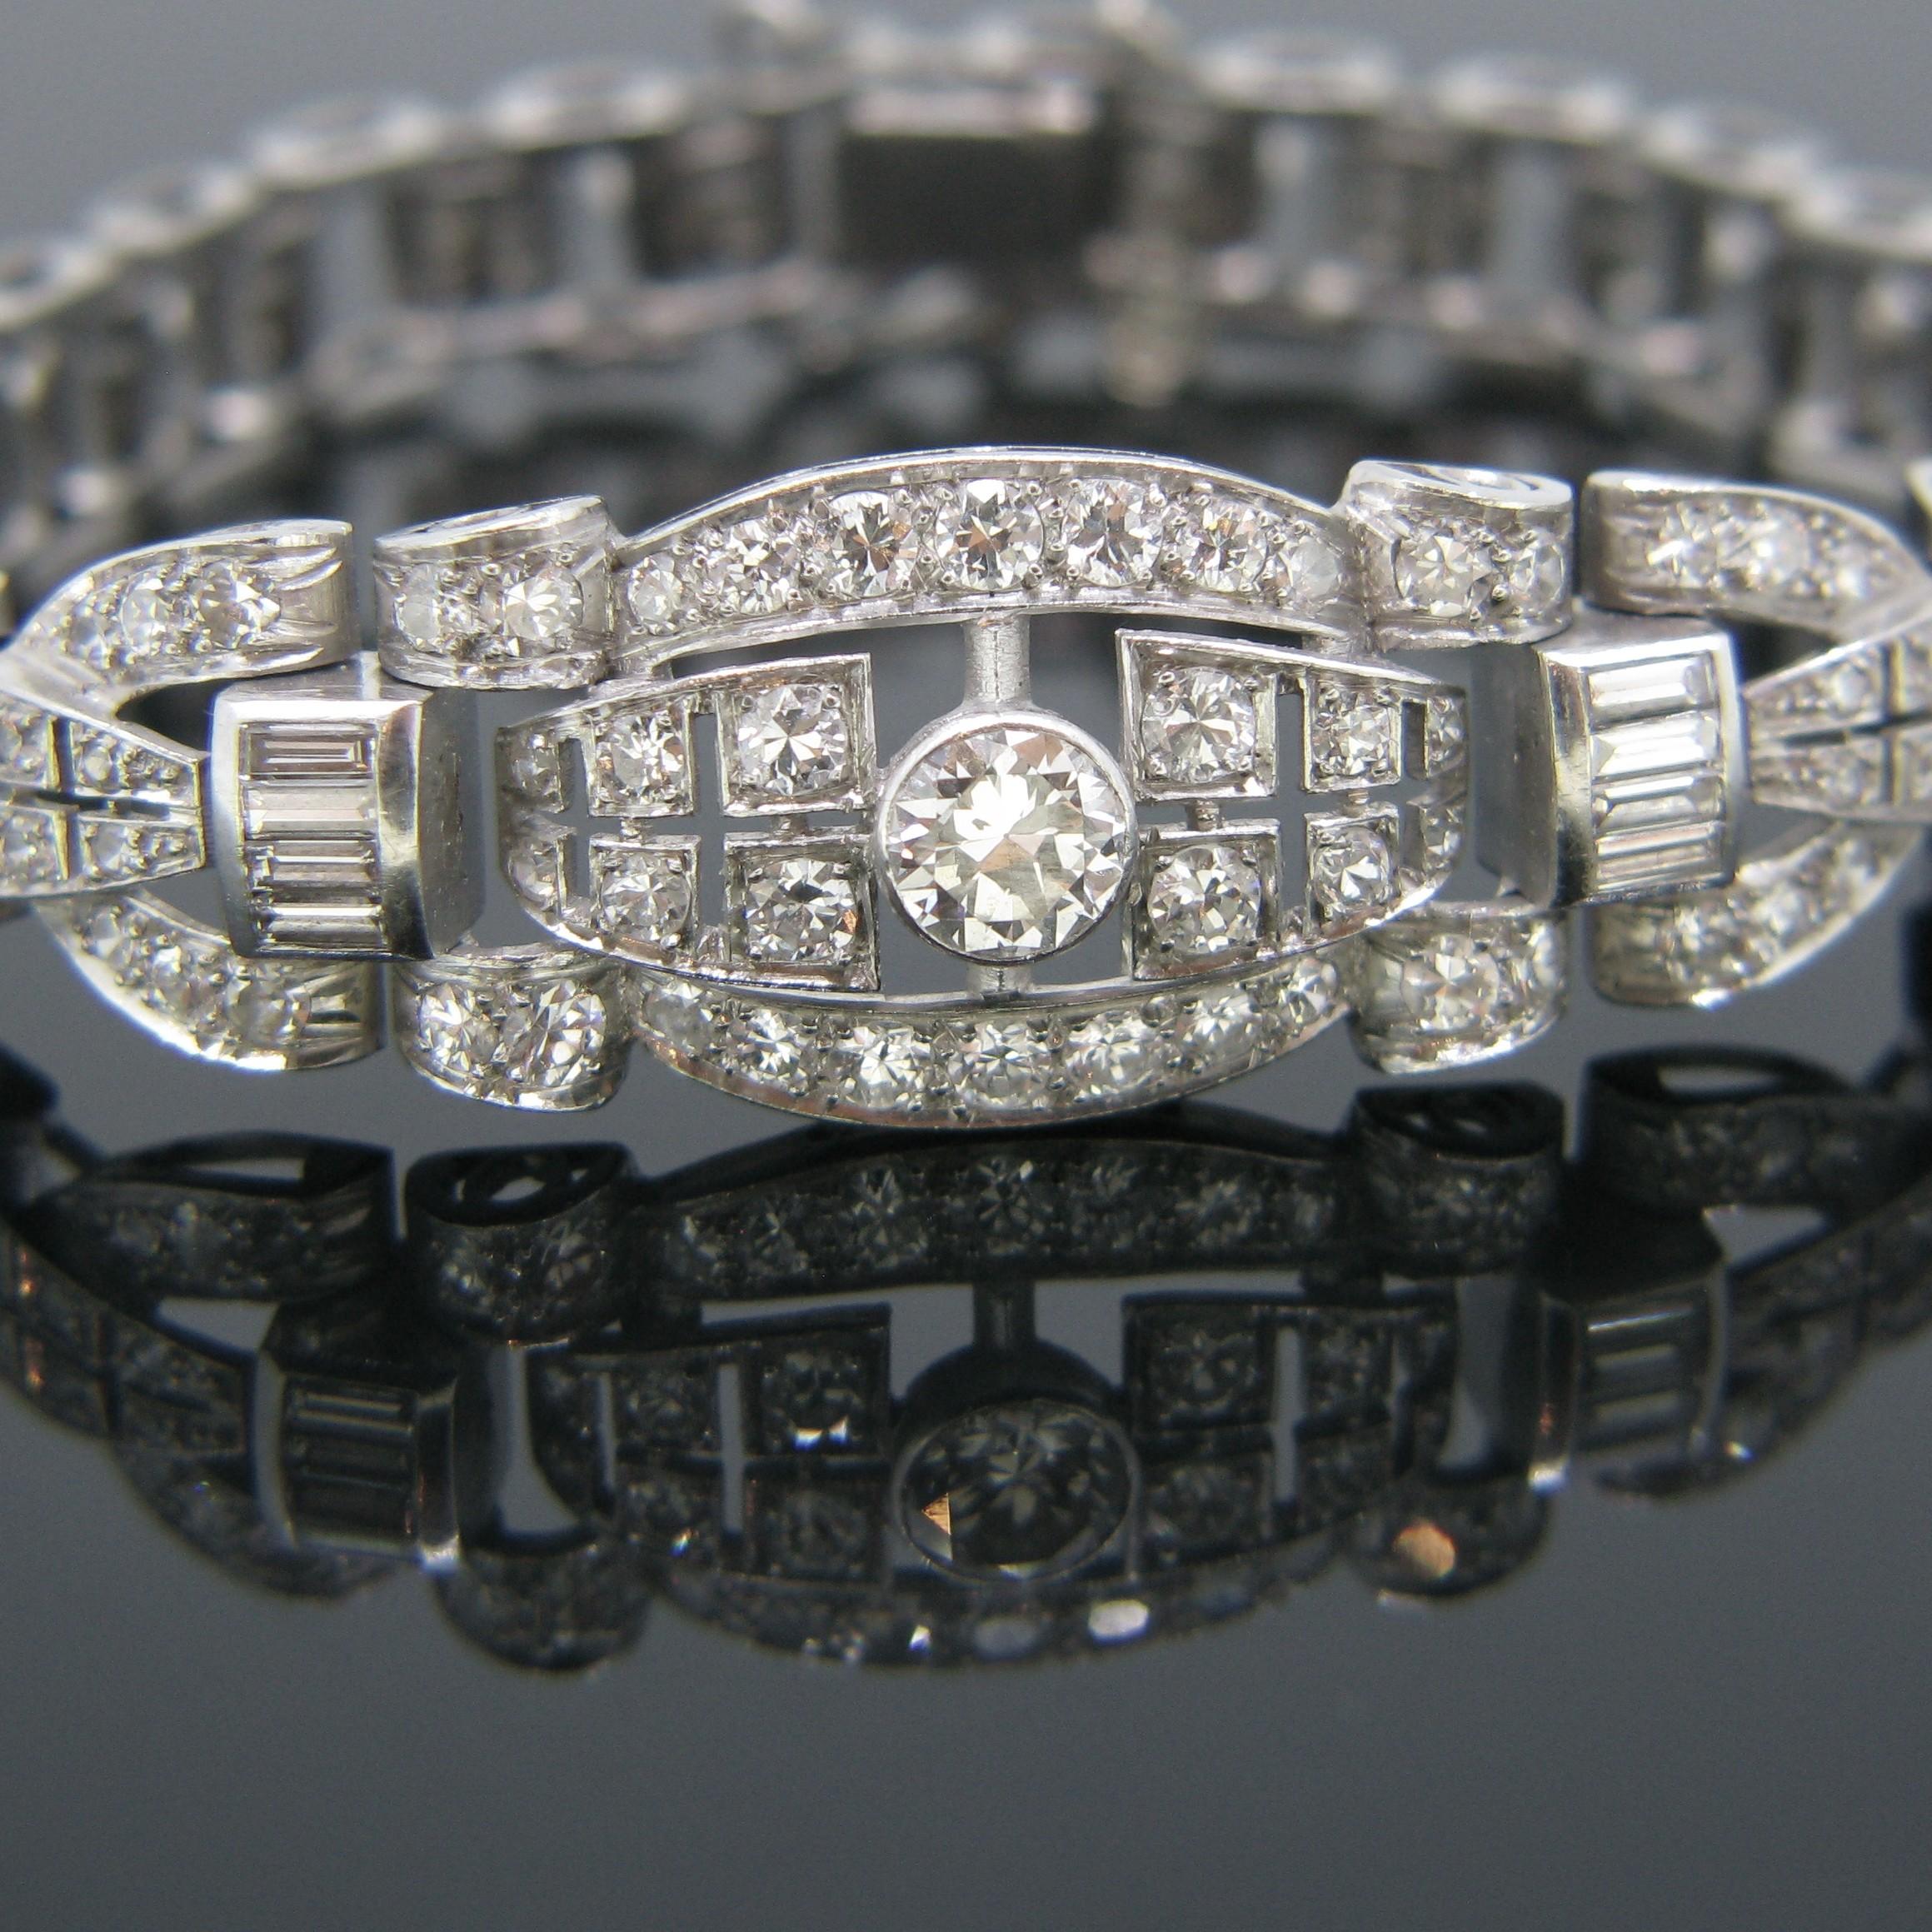 This beautiful bracelet comes directly from the Art Deco era. It is fully made in 18kt white gold and platinum. It features 118 diamonds – 110 are old European cut and 8 are baguettes. The centre diamond weighs 0.60ct approximately and the total